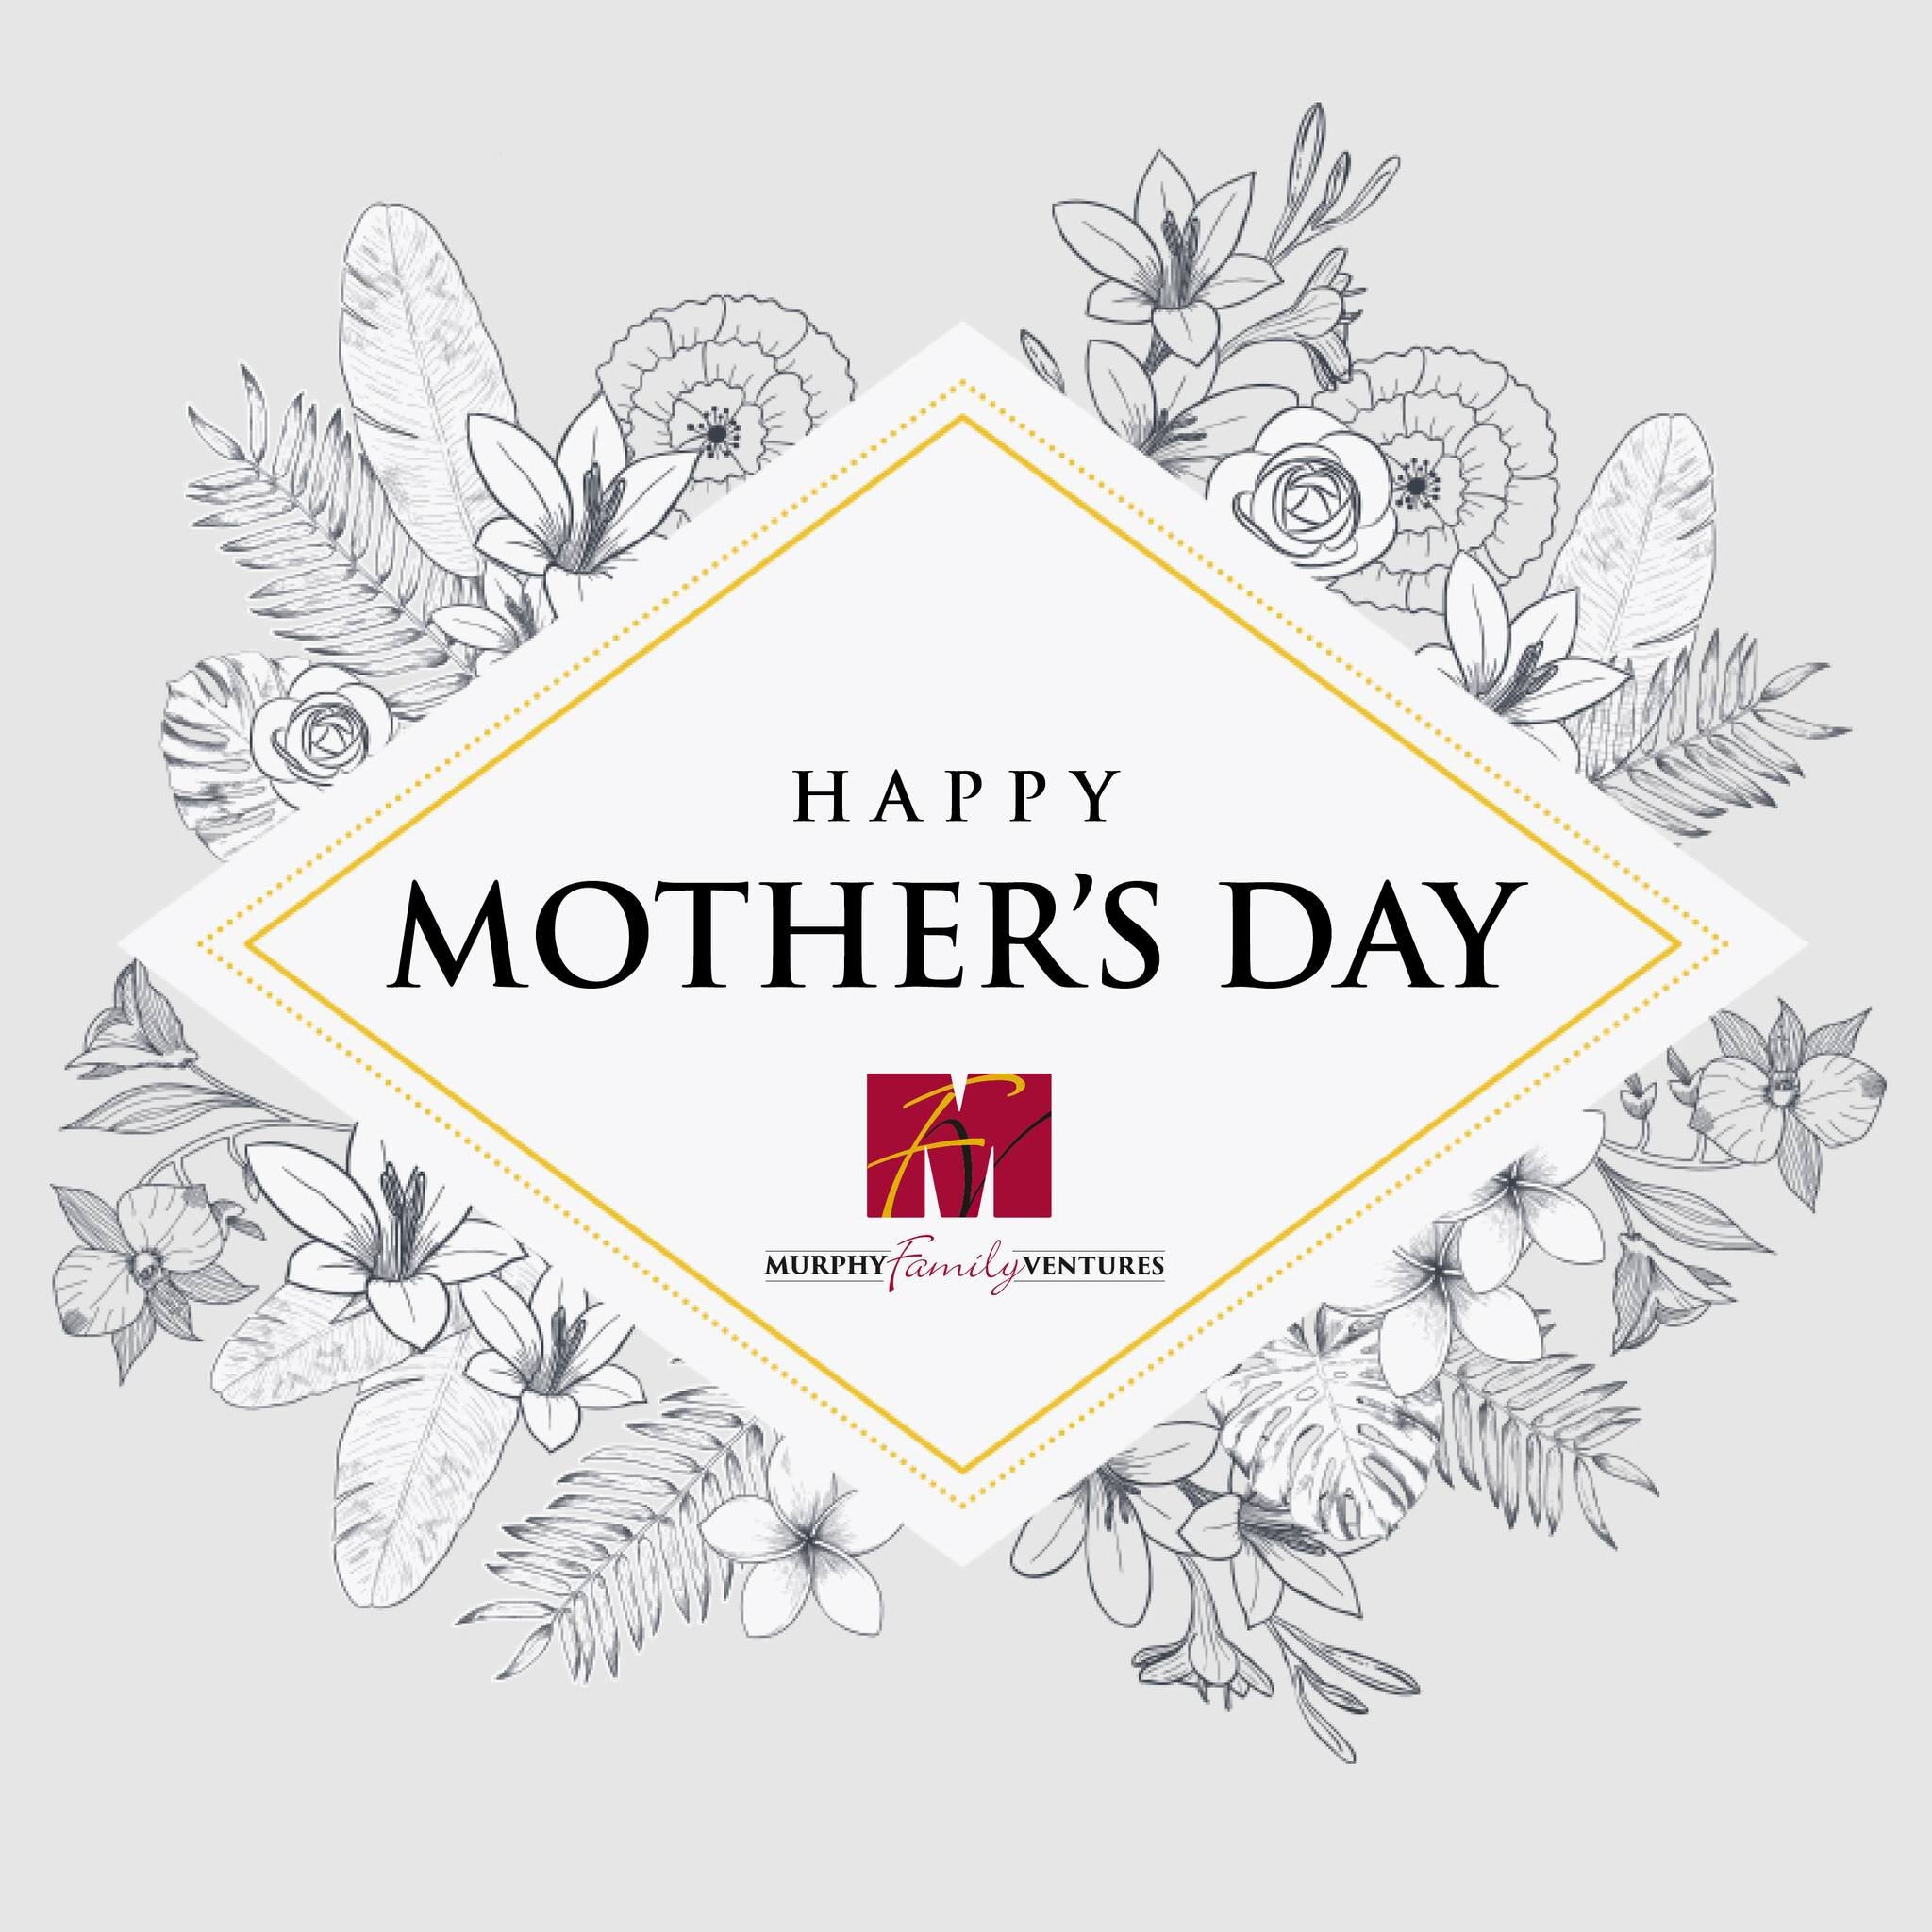 Happy Mother's day to all the MFV mom's out there!